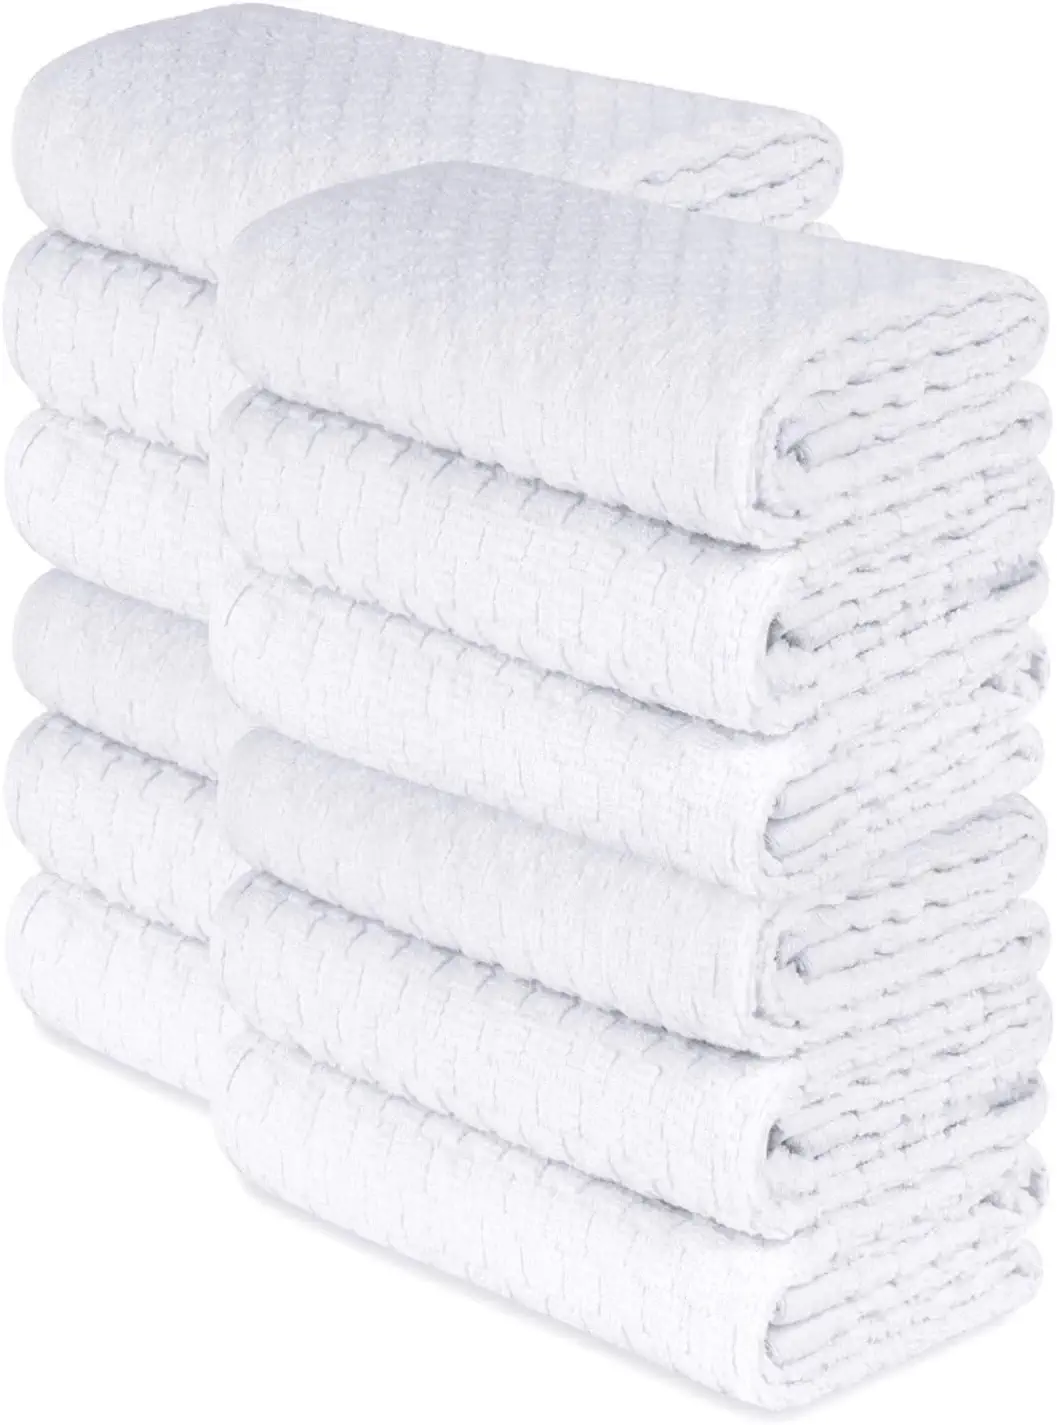  KAF Home White Kitchen Towels, 10 Pack, 100% Cotton - 20 x 30,  Soft and Functional Multi-Purpose, Baking, Cooking, Cleaning, Printing,  Monogramming, and Embroidery (Plain Weave): Home & Kitchen